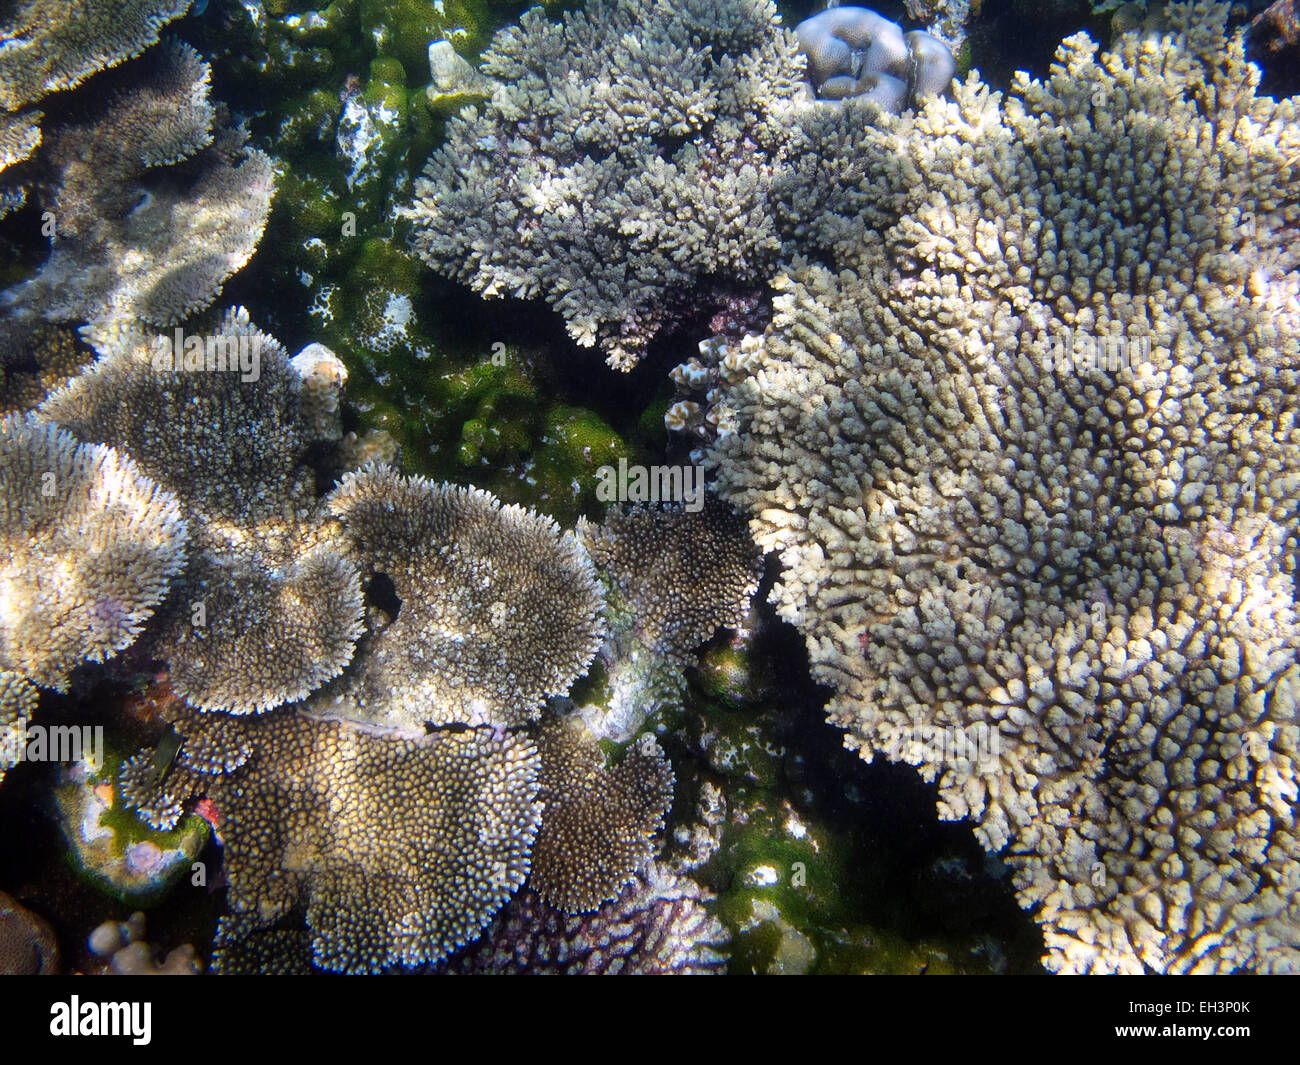 Porites leafy coral on a coral reef in the Maldives Stock Photo